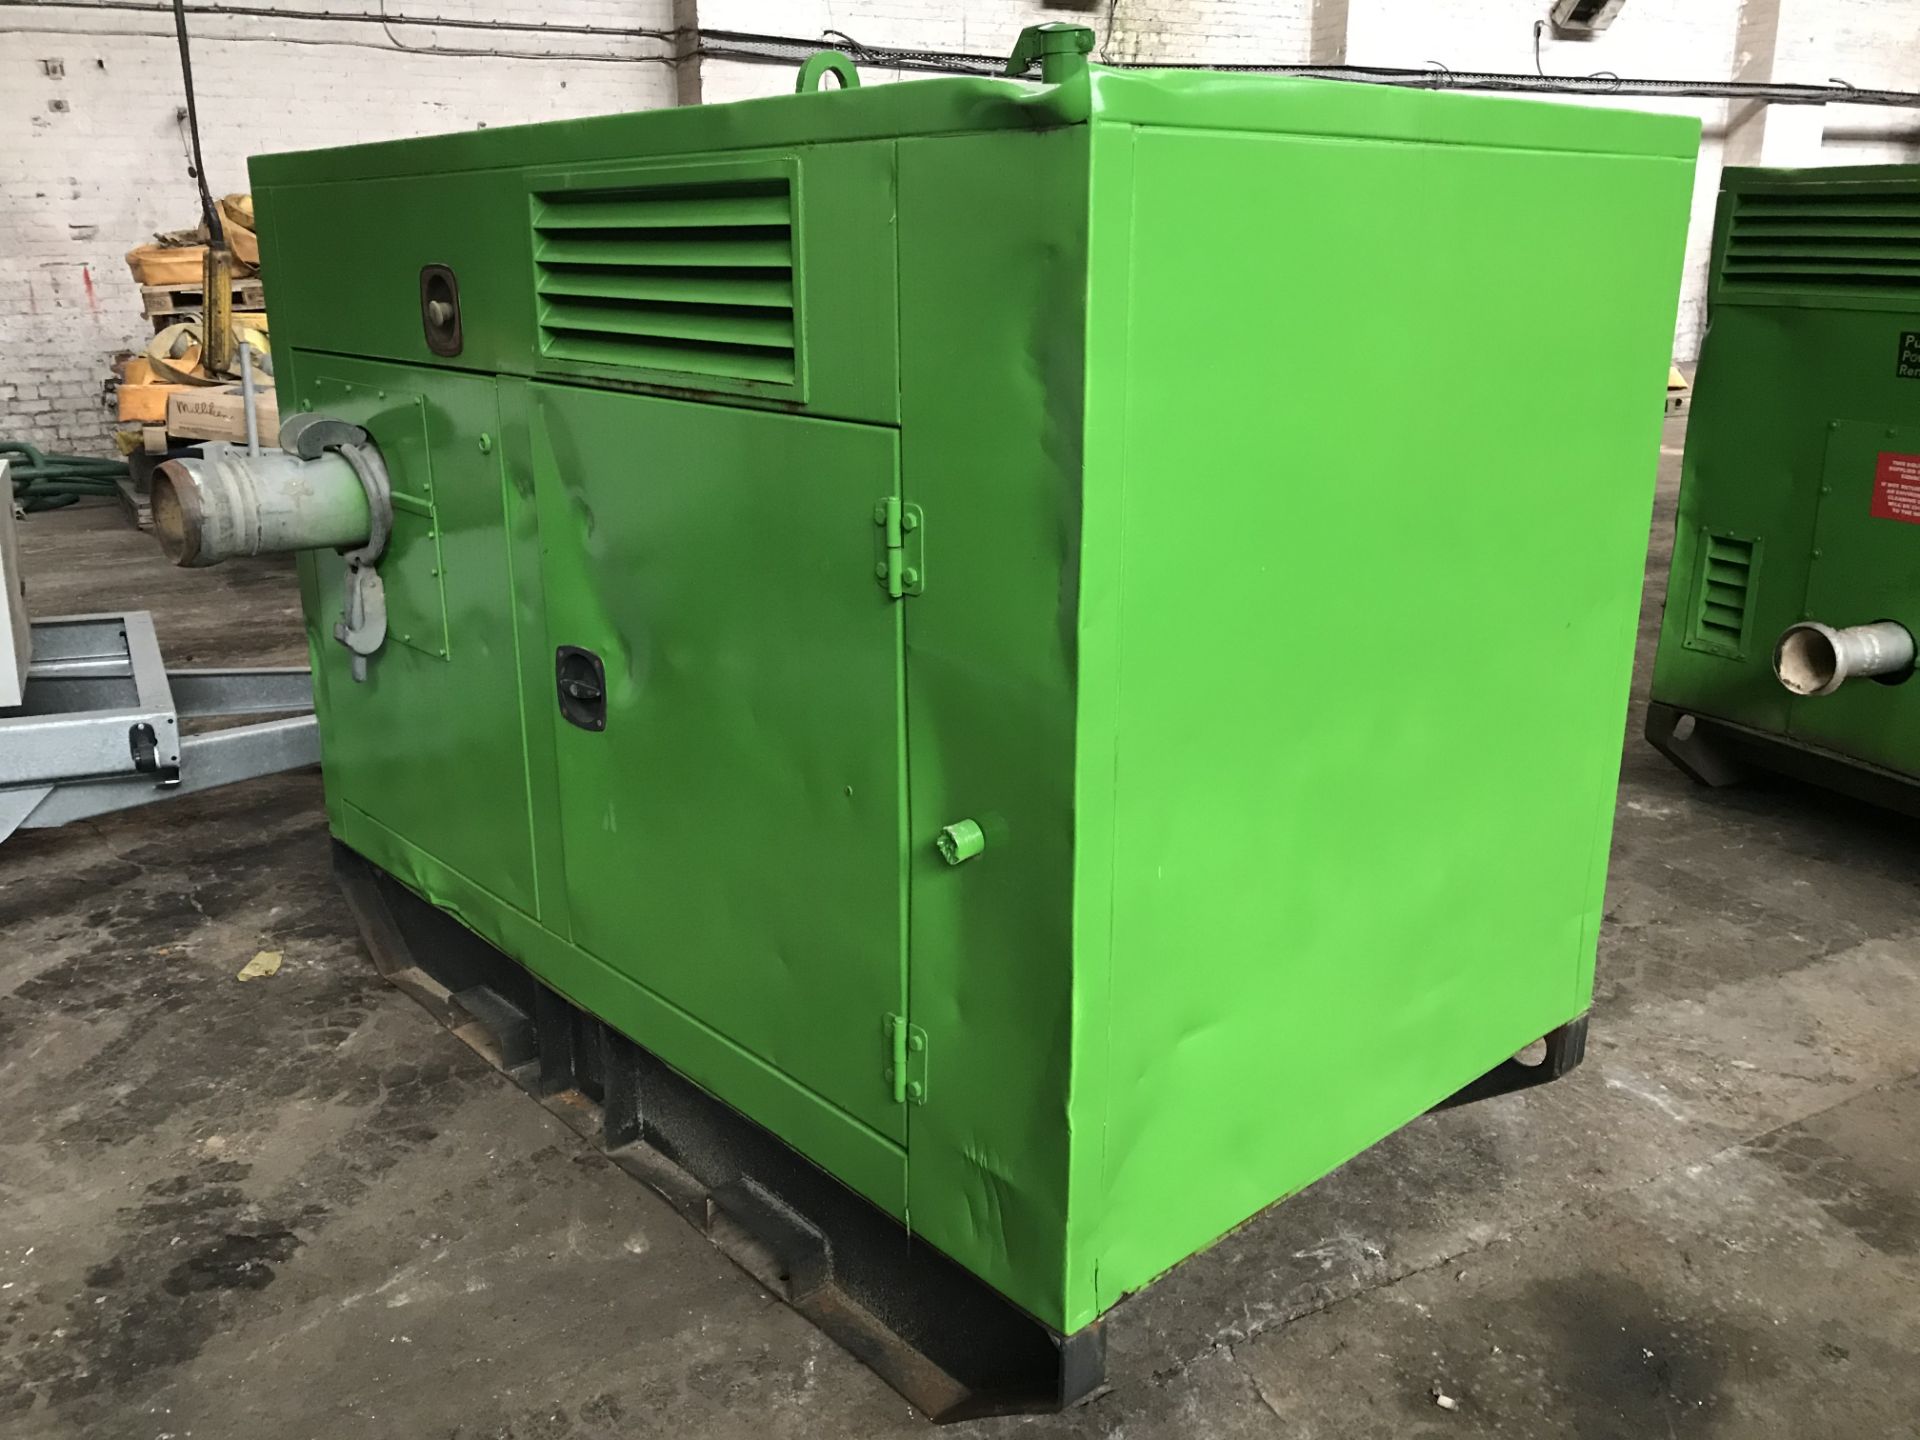 Selwood S150 6"" Solids Handling Pump Silent Cabinet | Ref: A166/2 - Image 2 of 12